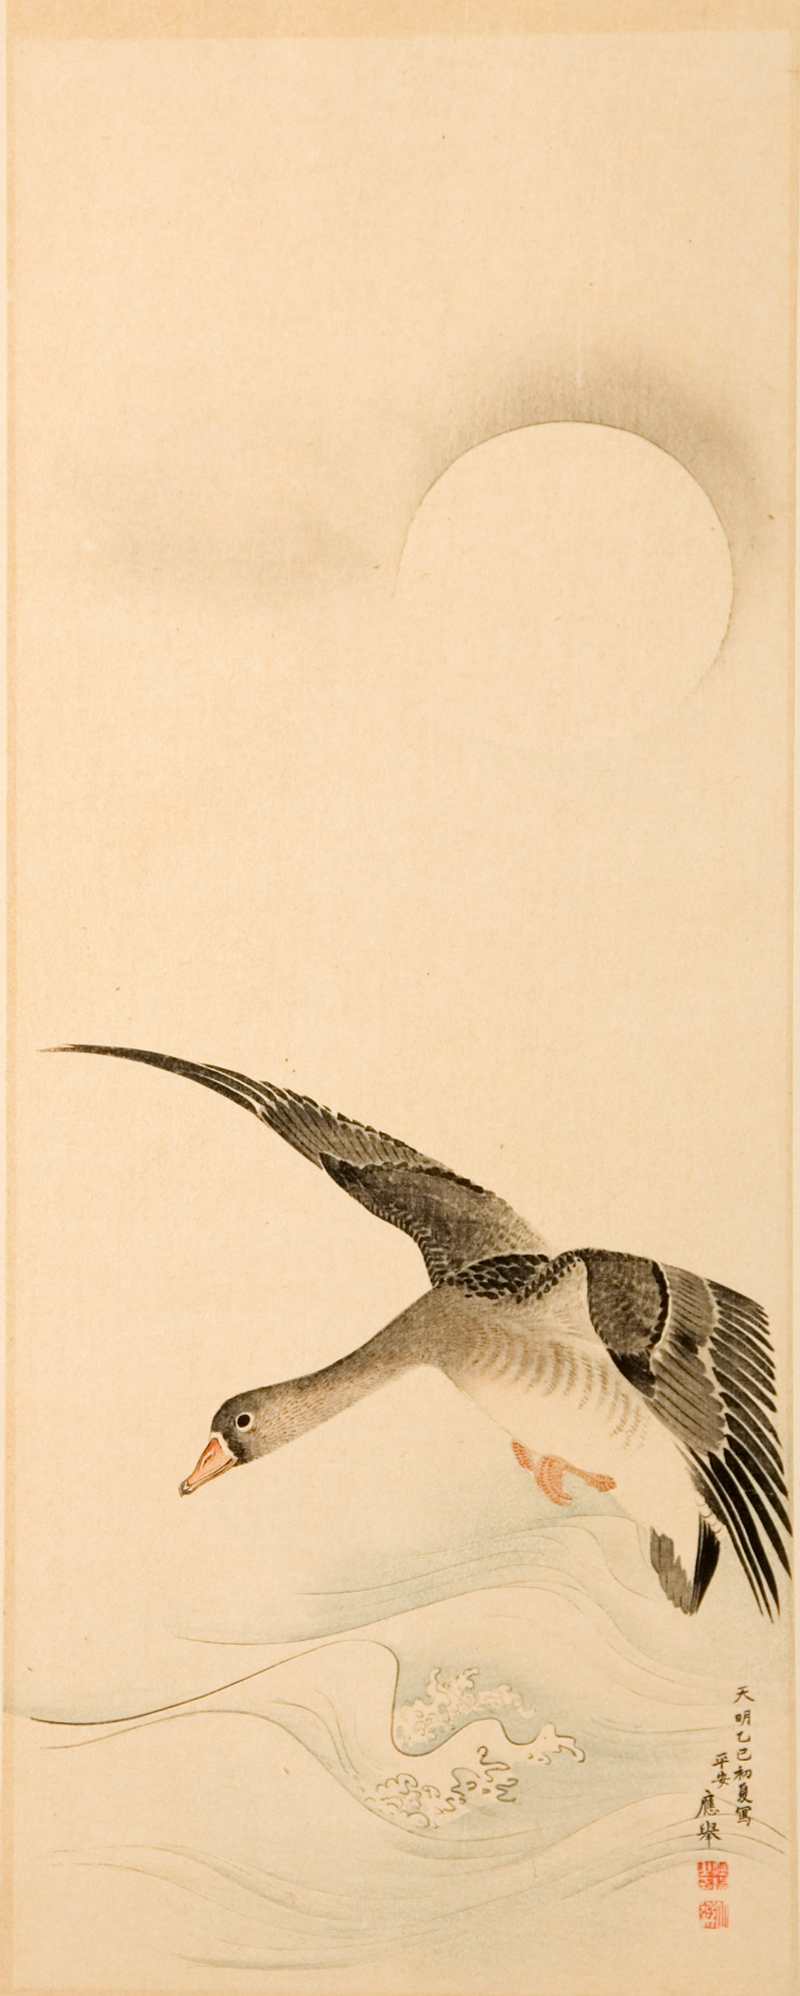 a goose in flight soars over an ocean of waves on the bottom third of the print. An outline of a moon is in the upper part of the print. Minimal lines and colors make up this tall rectangular woodcut. 